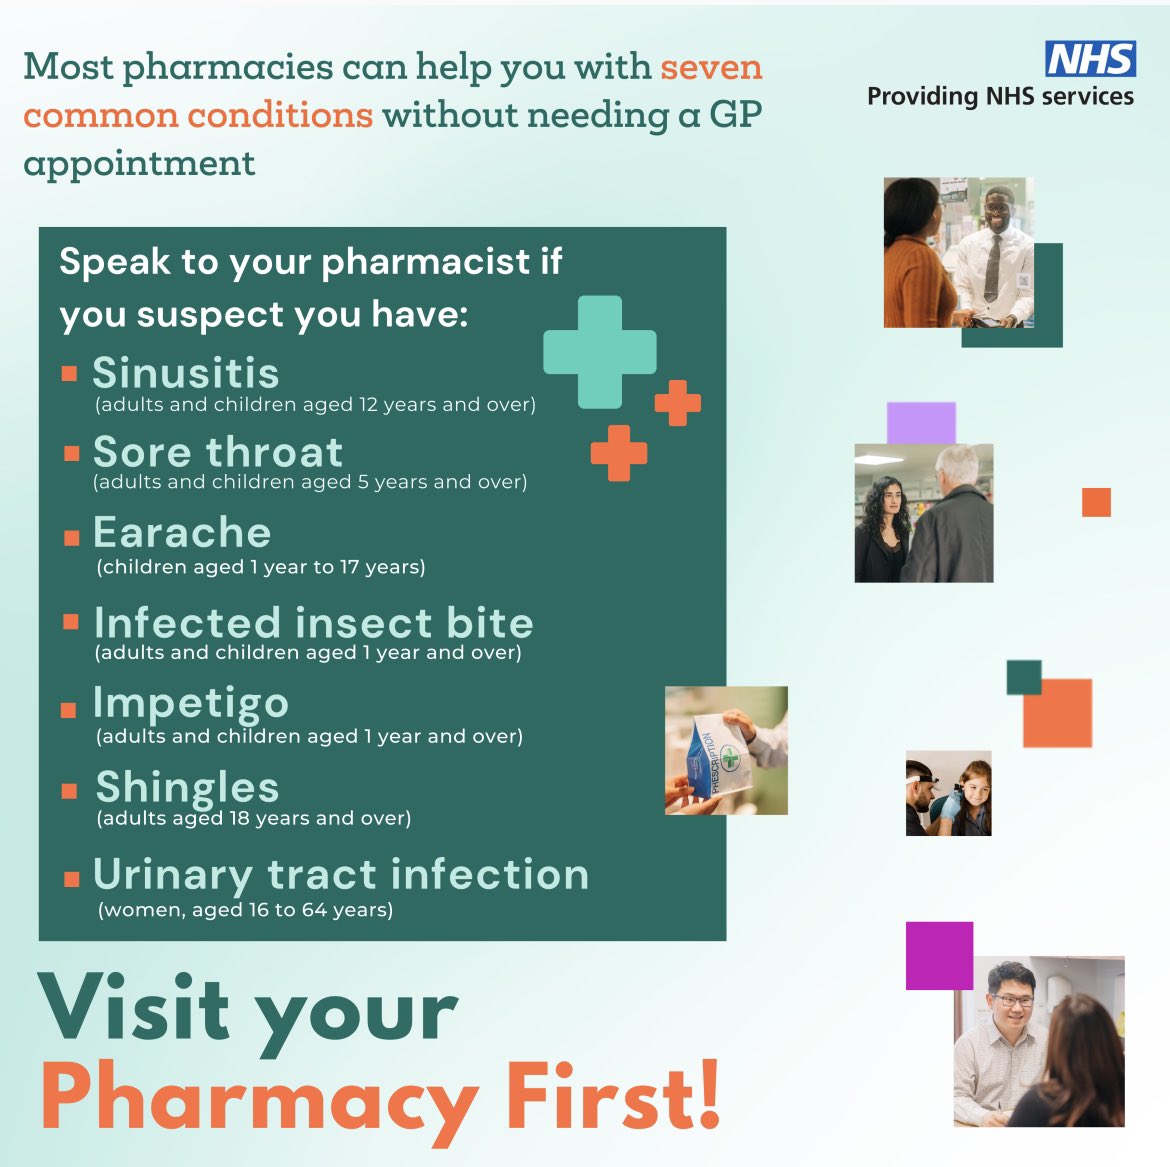 Good luck Team Community Pharmacy - the front door to the NHS just got wider - we’ve got this! #PharmacyFirst